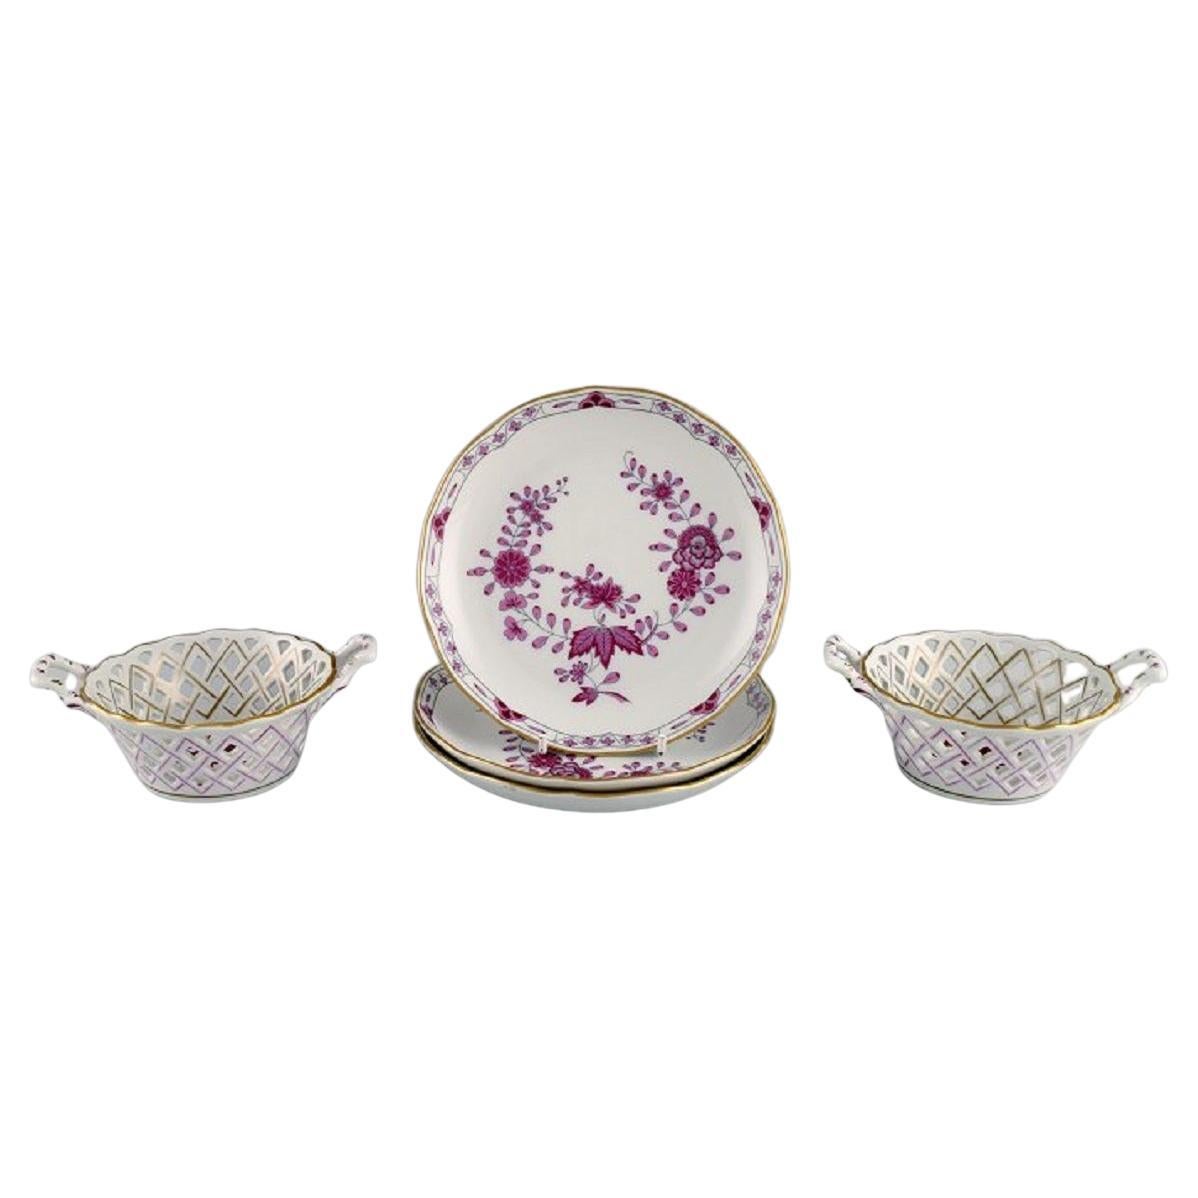 Hutschenreuther, Germany. Three plates and two bowls in openwork porcelain. For Sale